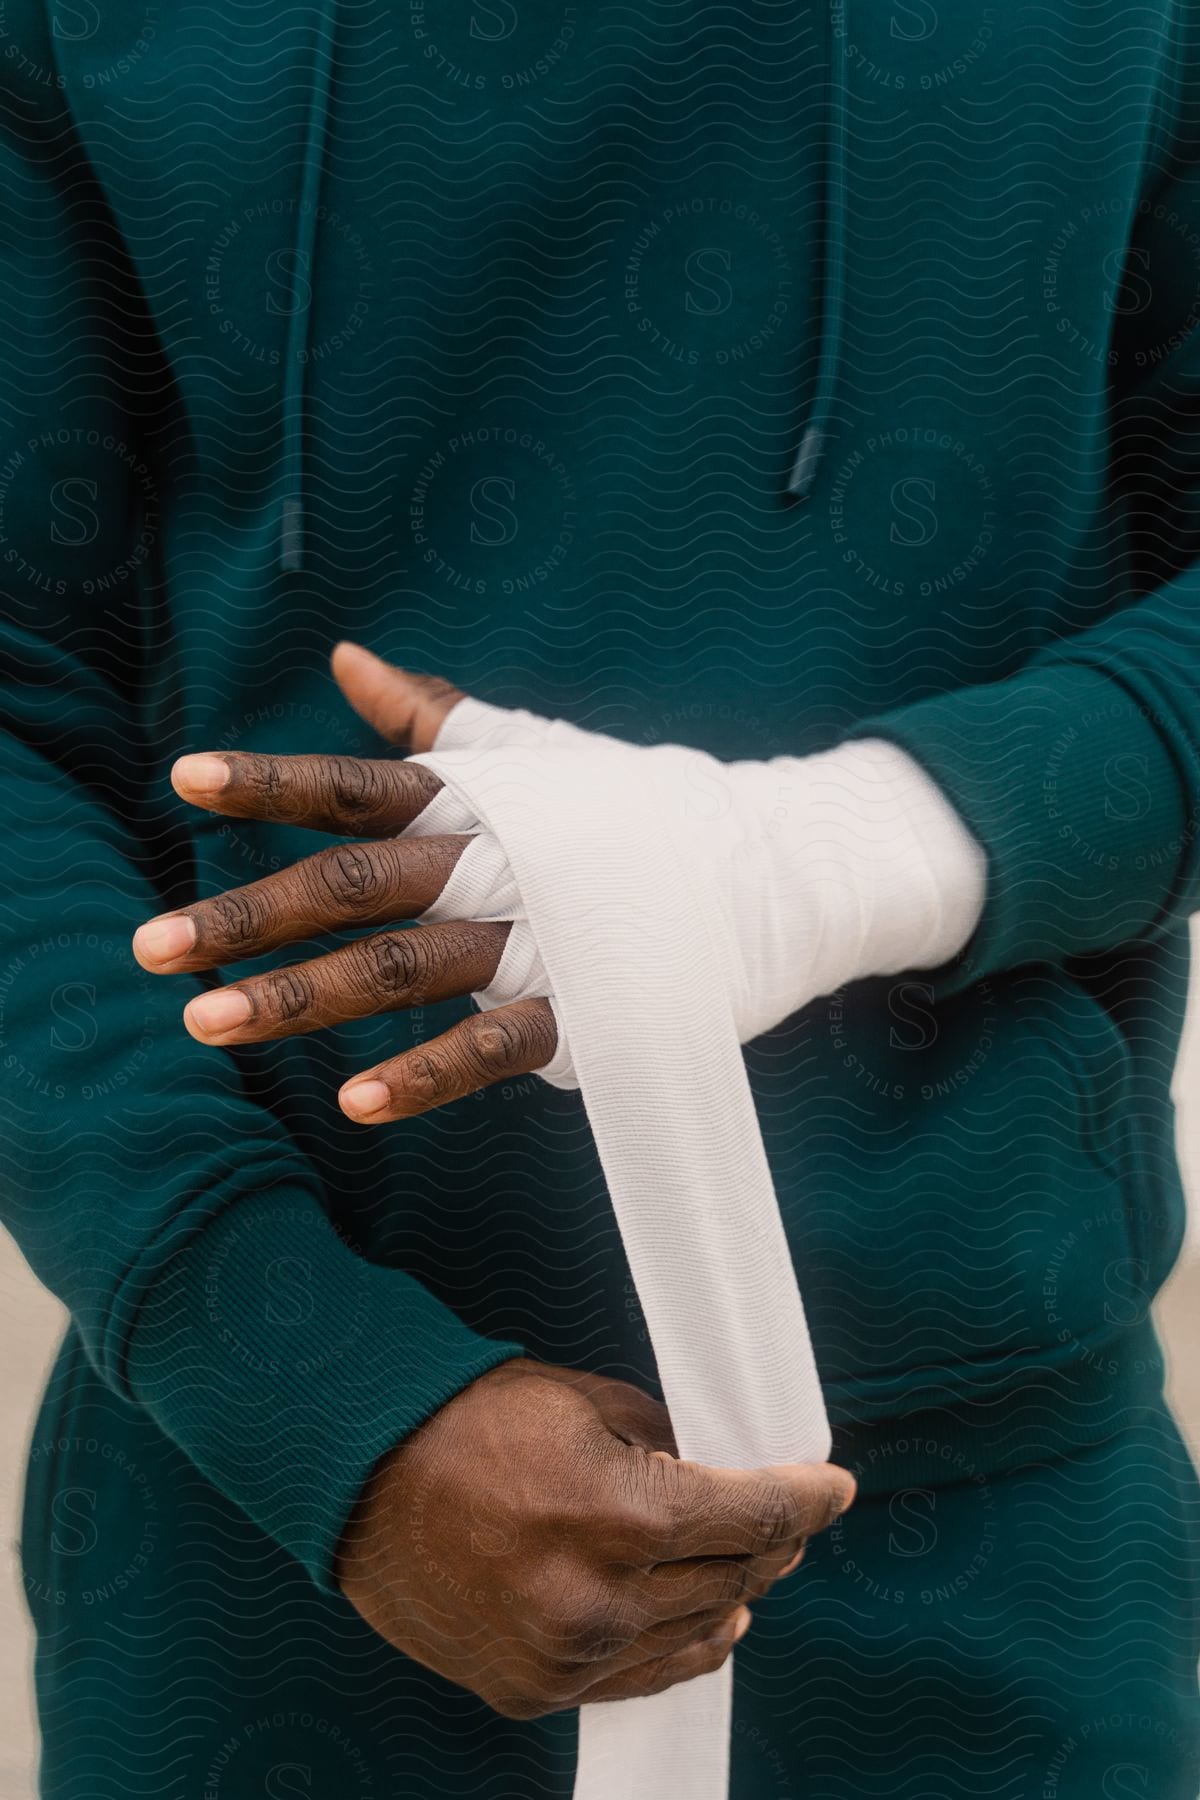 Man wears a sweatshirt and is bandaging one of his hands with a white bandage.